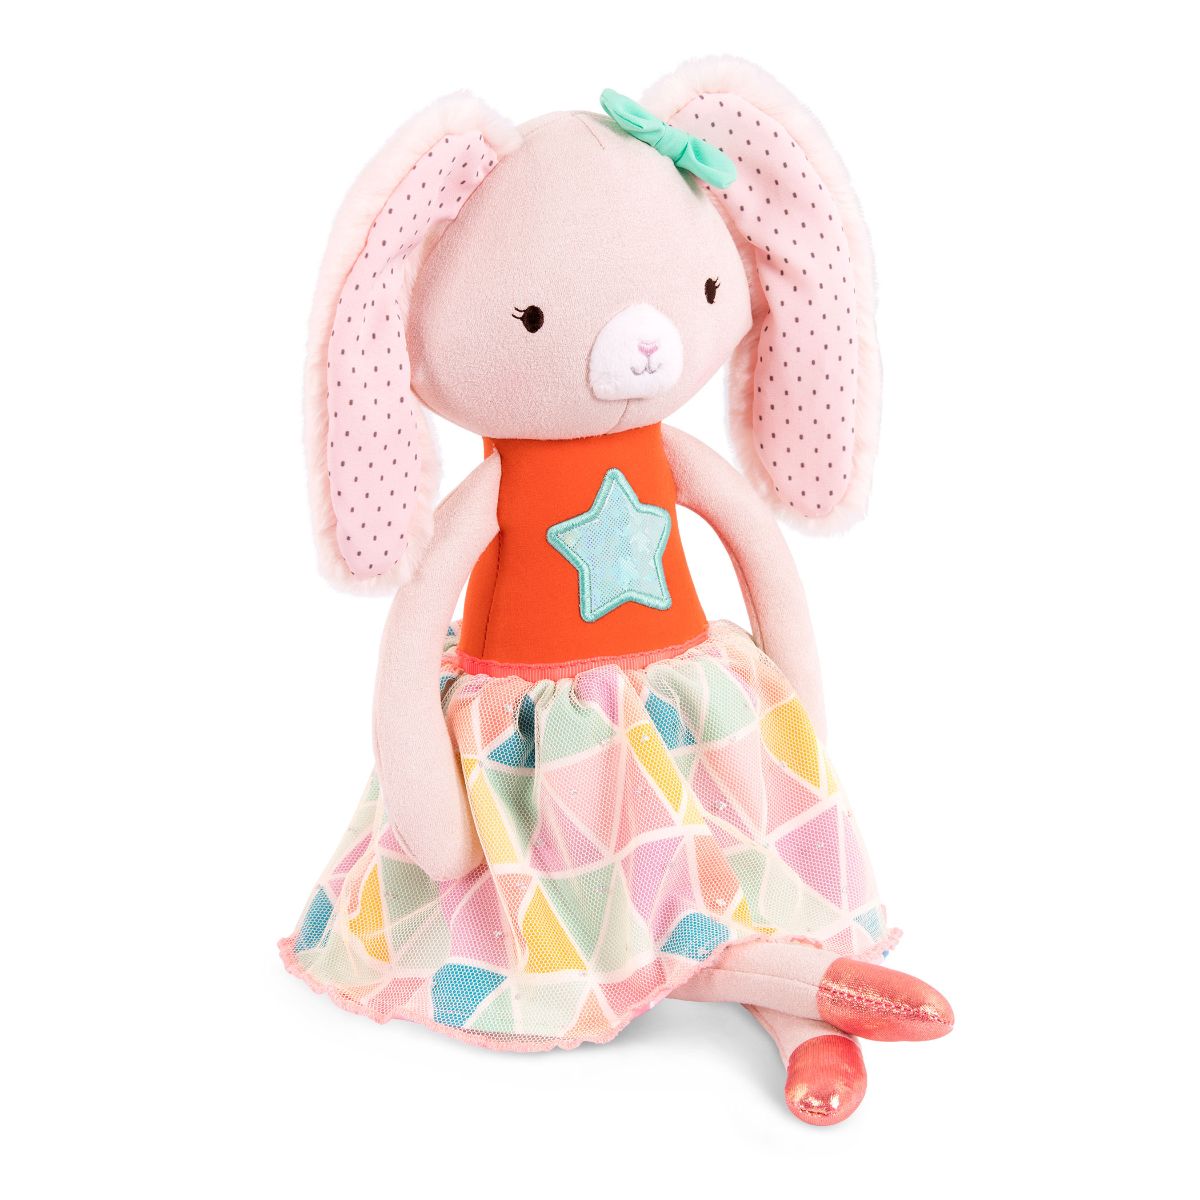 Tippy Toes – Becky Bunny Designer